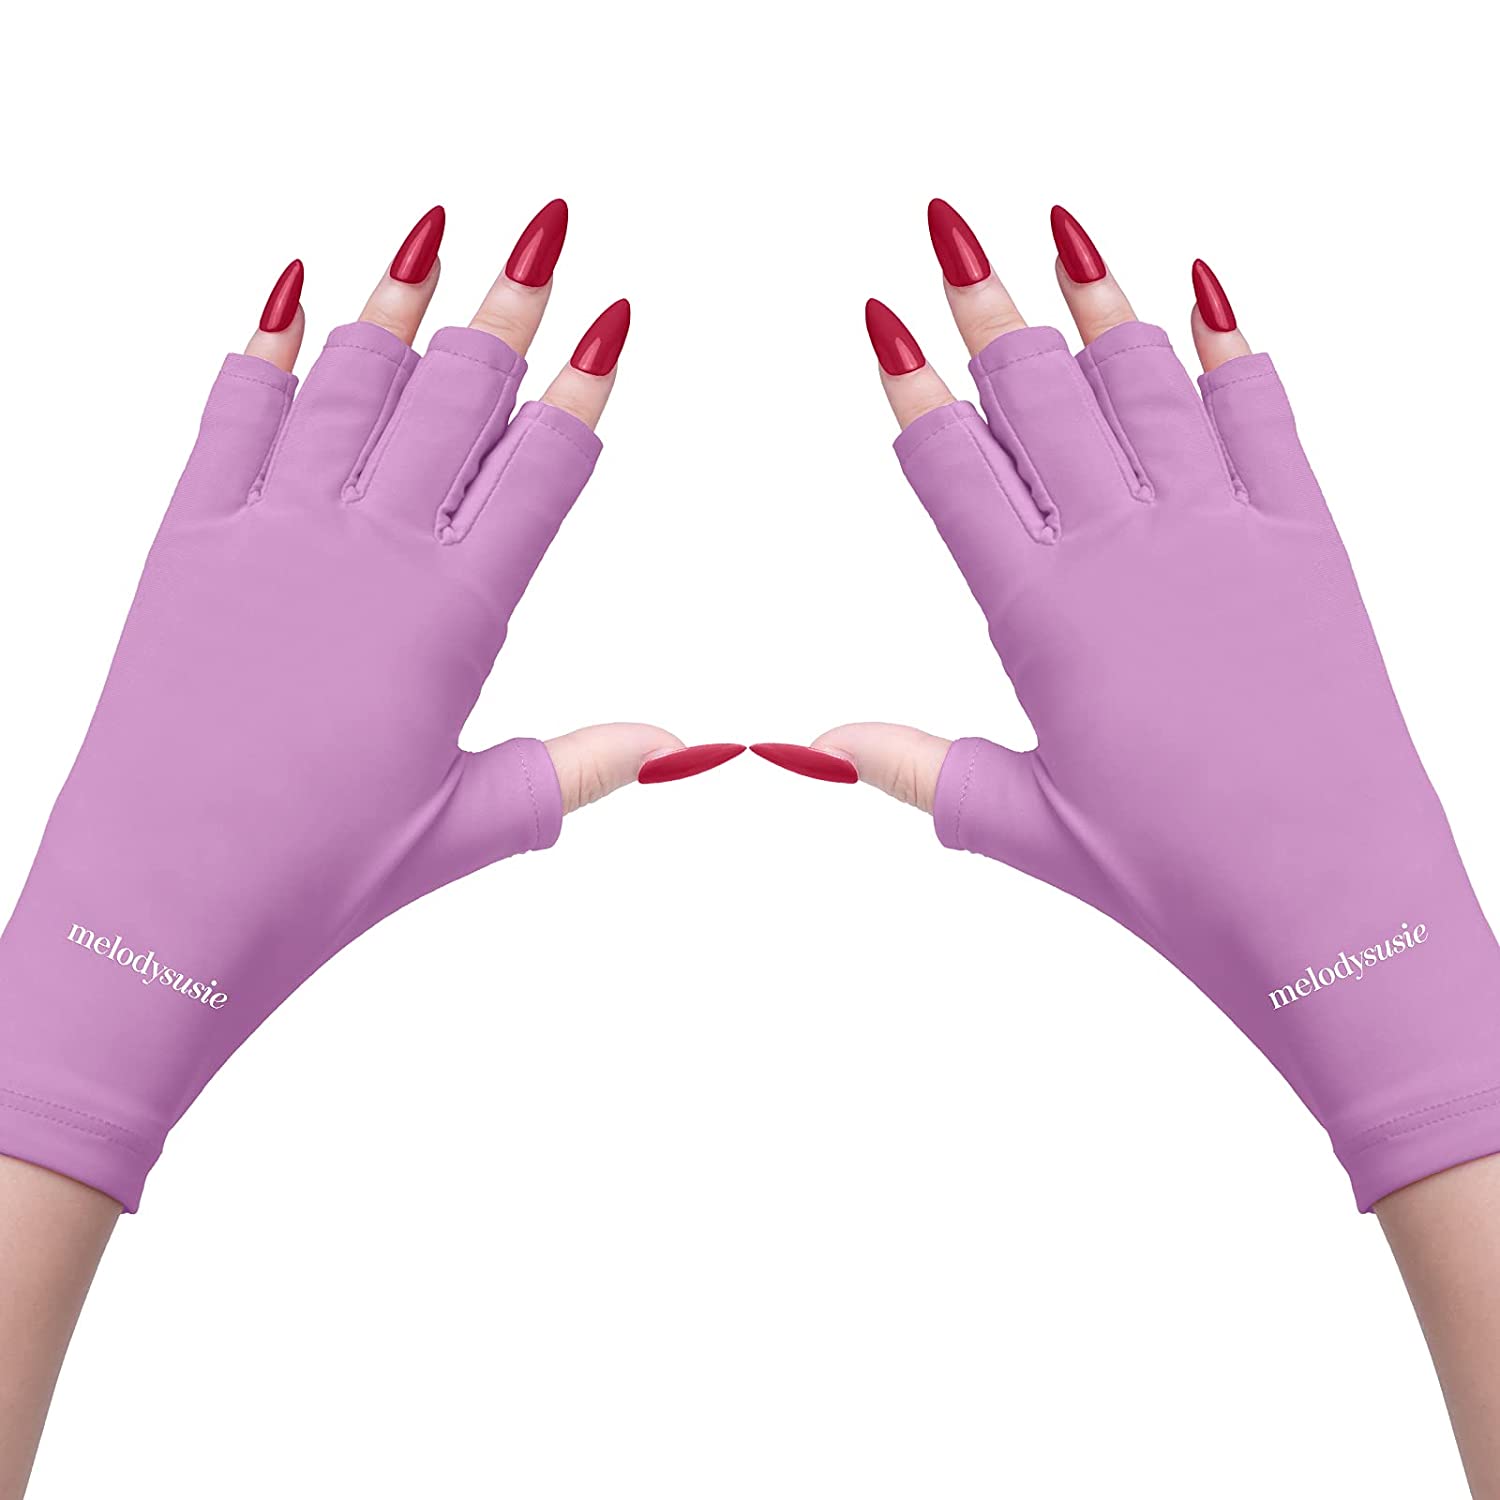 UV Shield Lycra Gloves for Manicure at Home or Salon, Purple